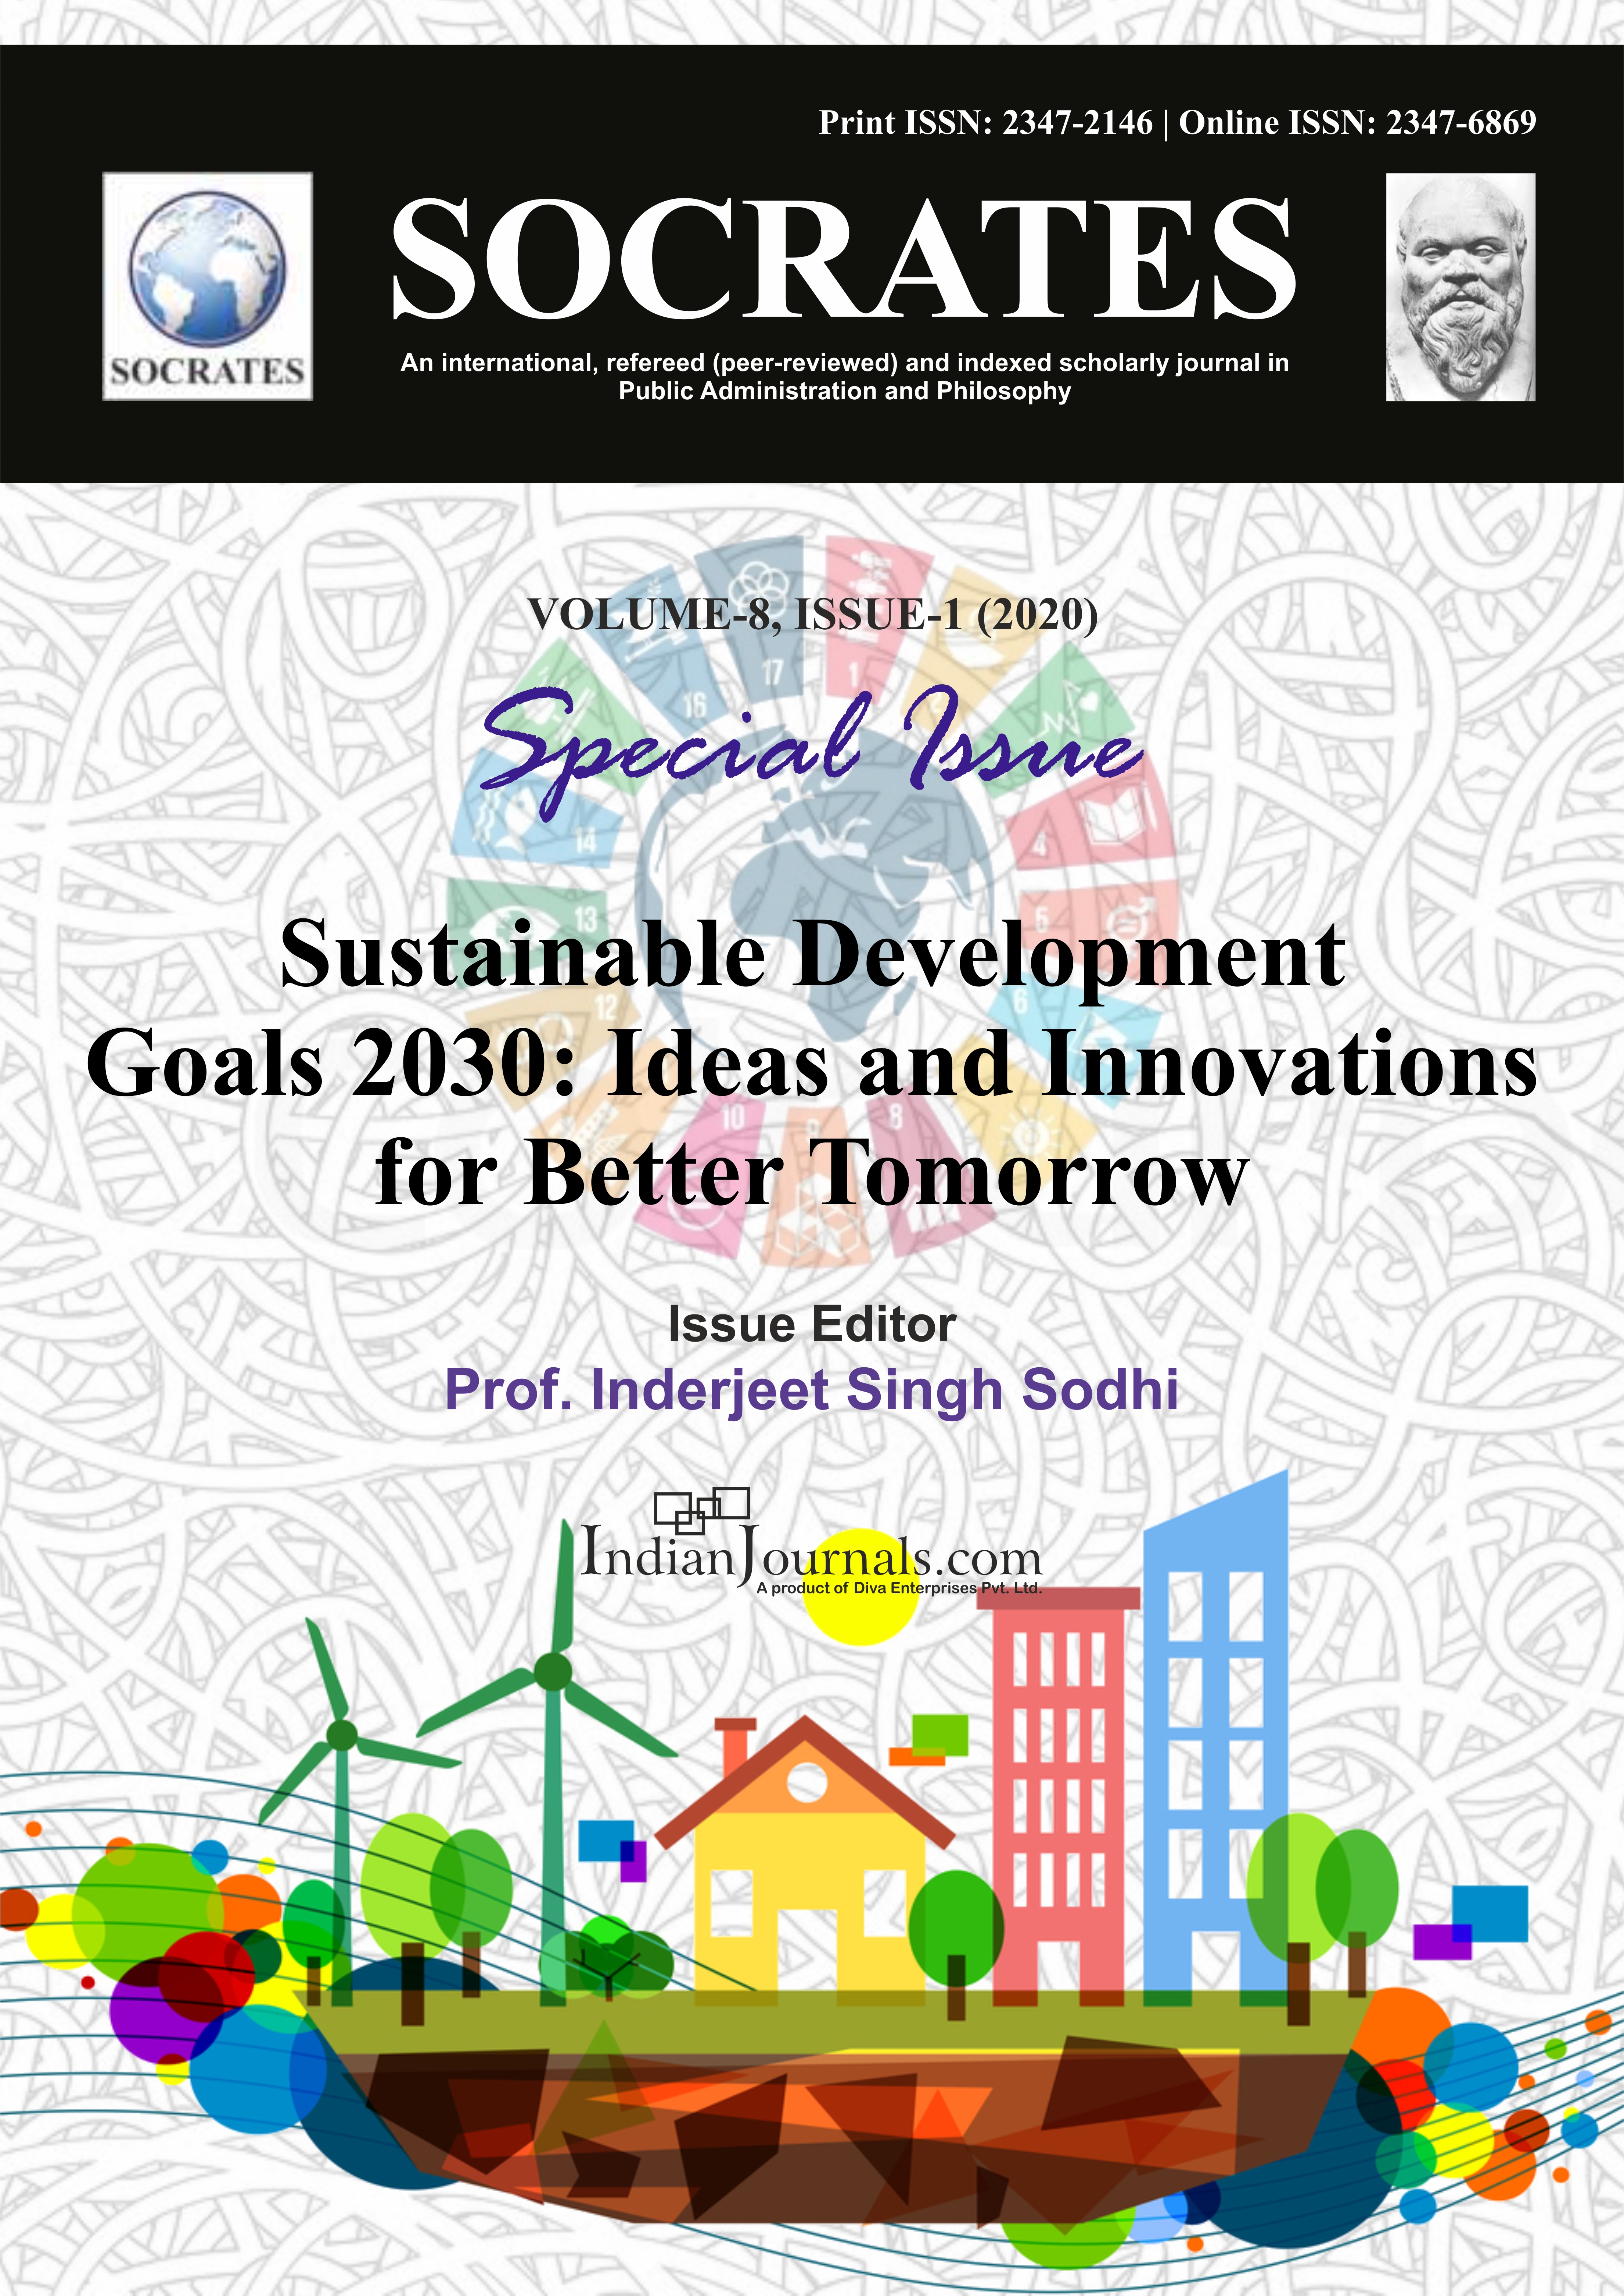 Sustainable Development Goals 2030: Ideas and Innovations for Better Tomorrow